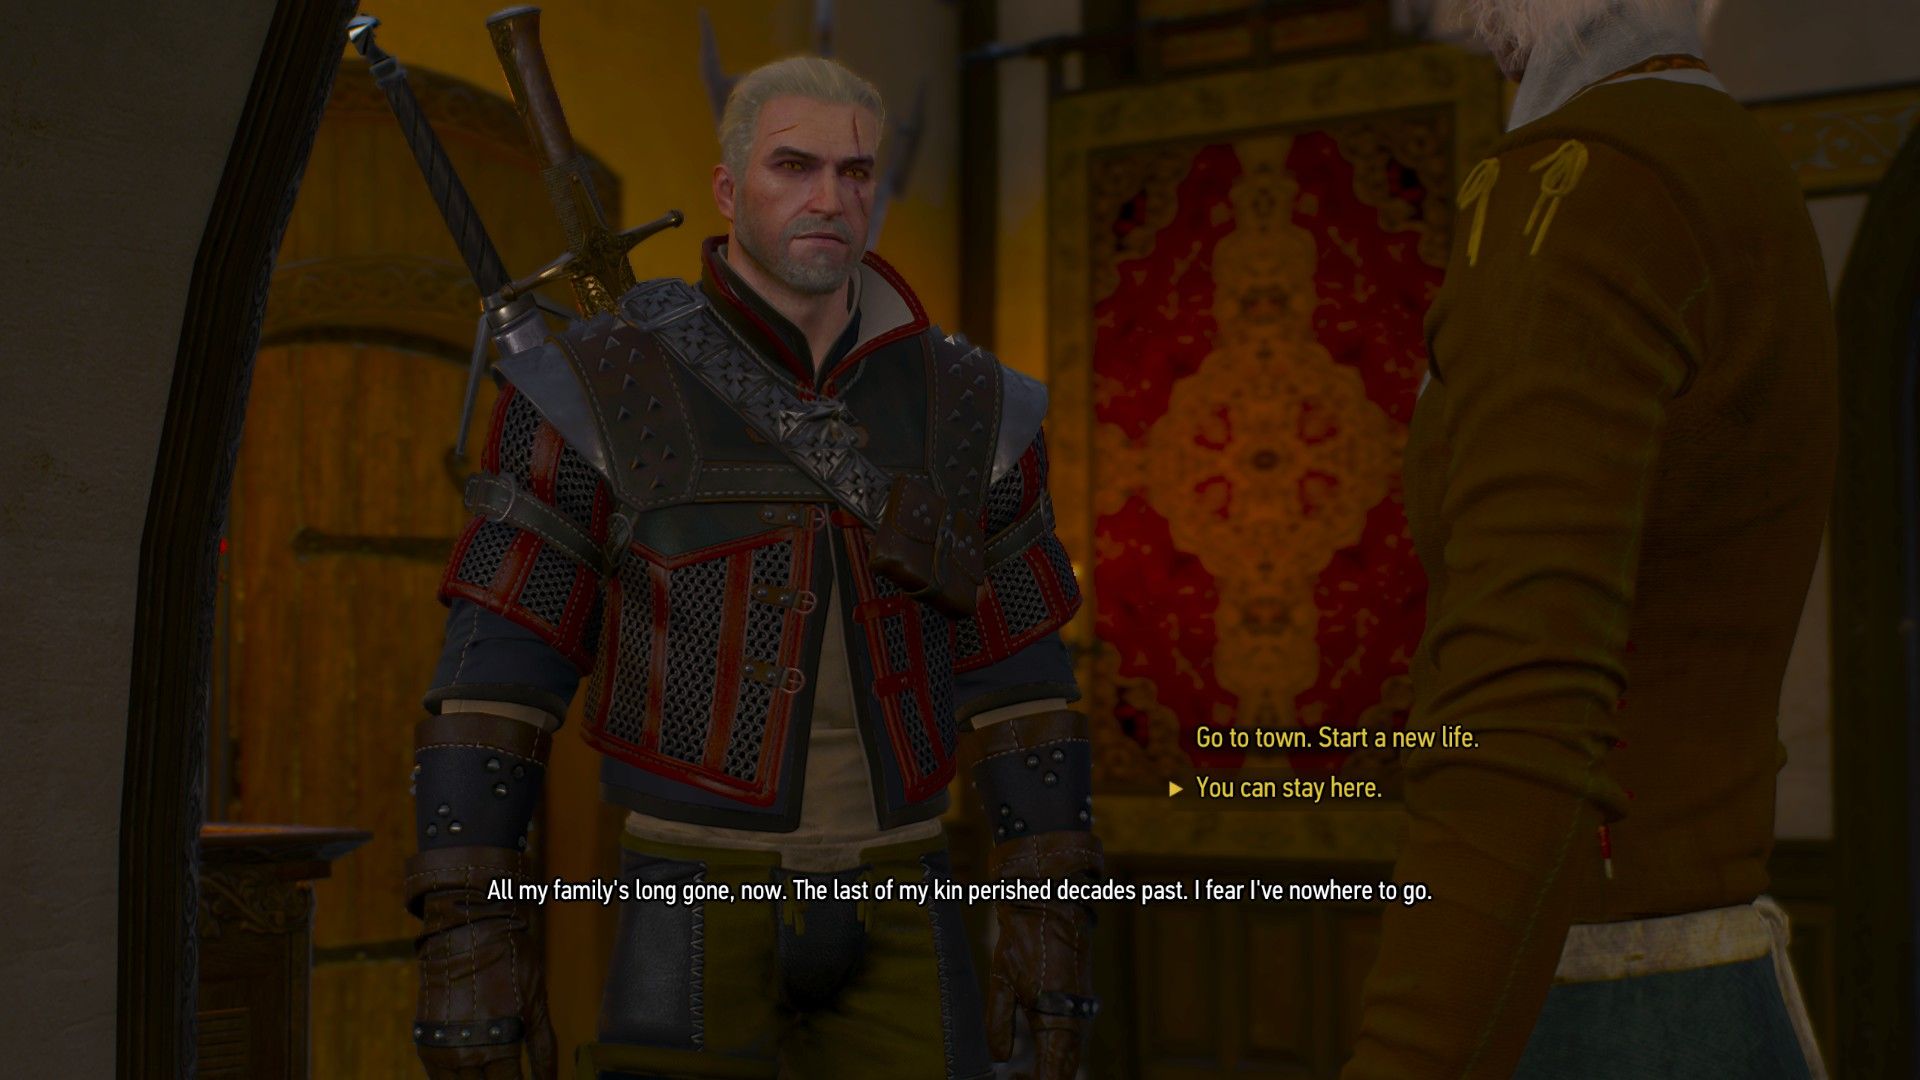 A screenshot of The Witcher 3's dialogue options with two crucial options displayed.